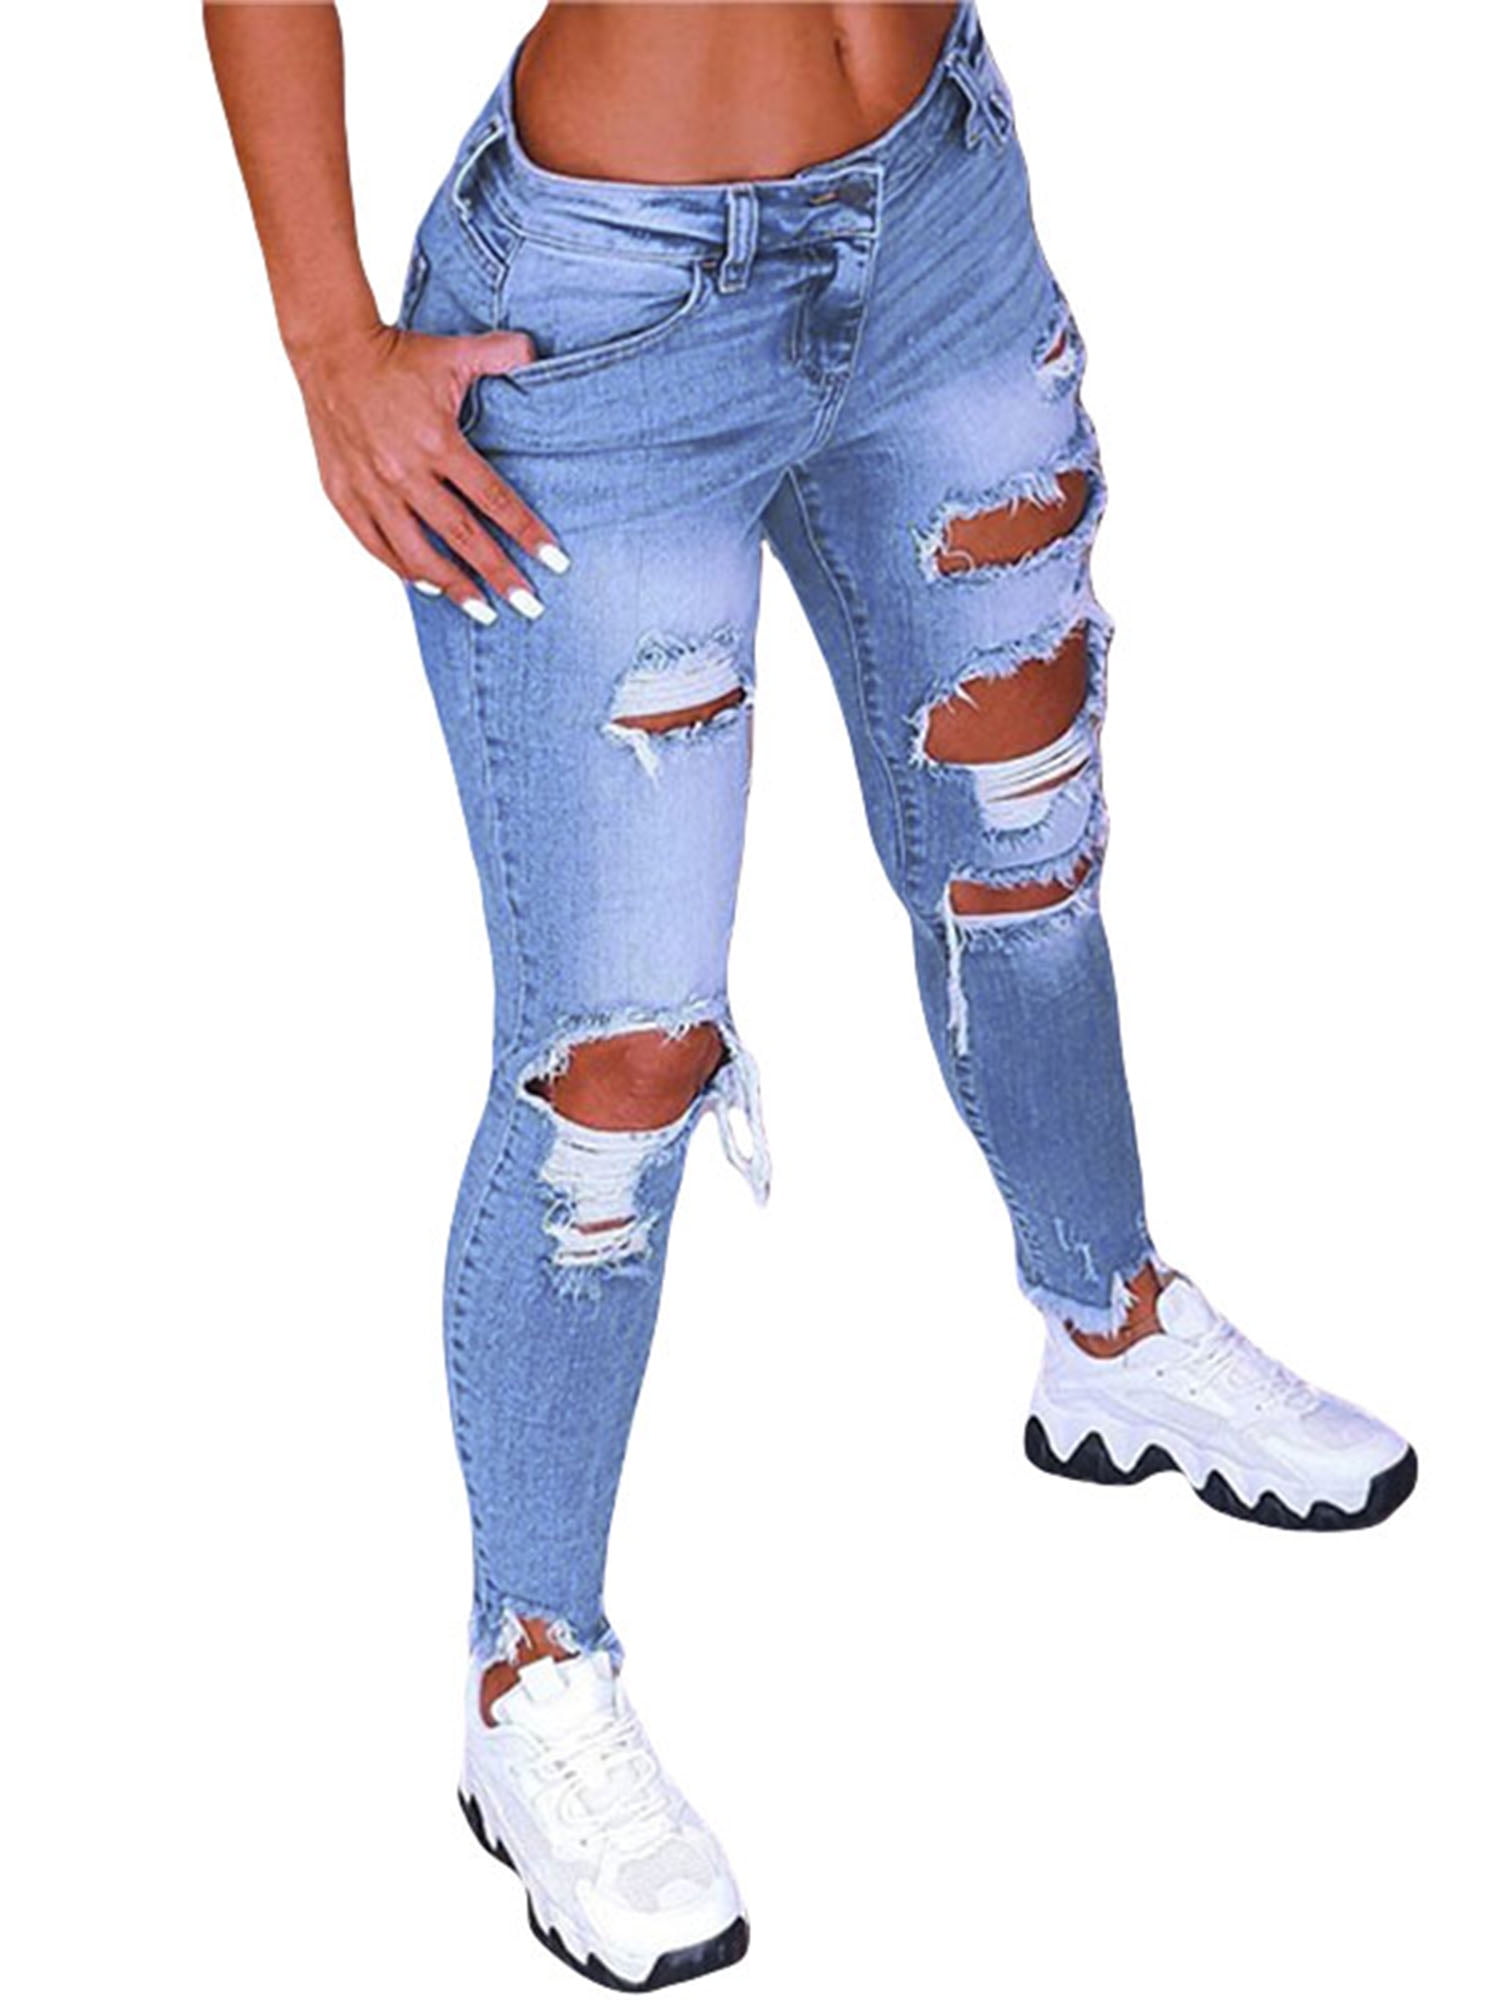 Women Skinny High Waist Ripped Jeans Stretch Jeggings Lady Trousers Denim Pants 